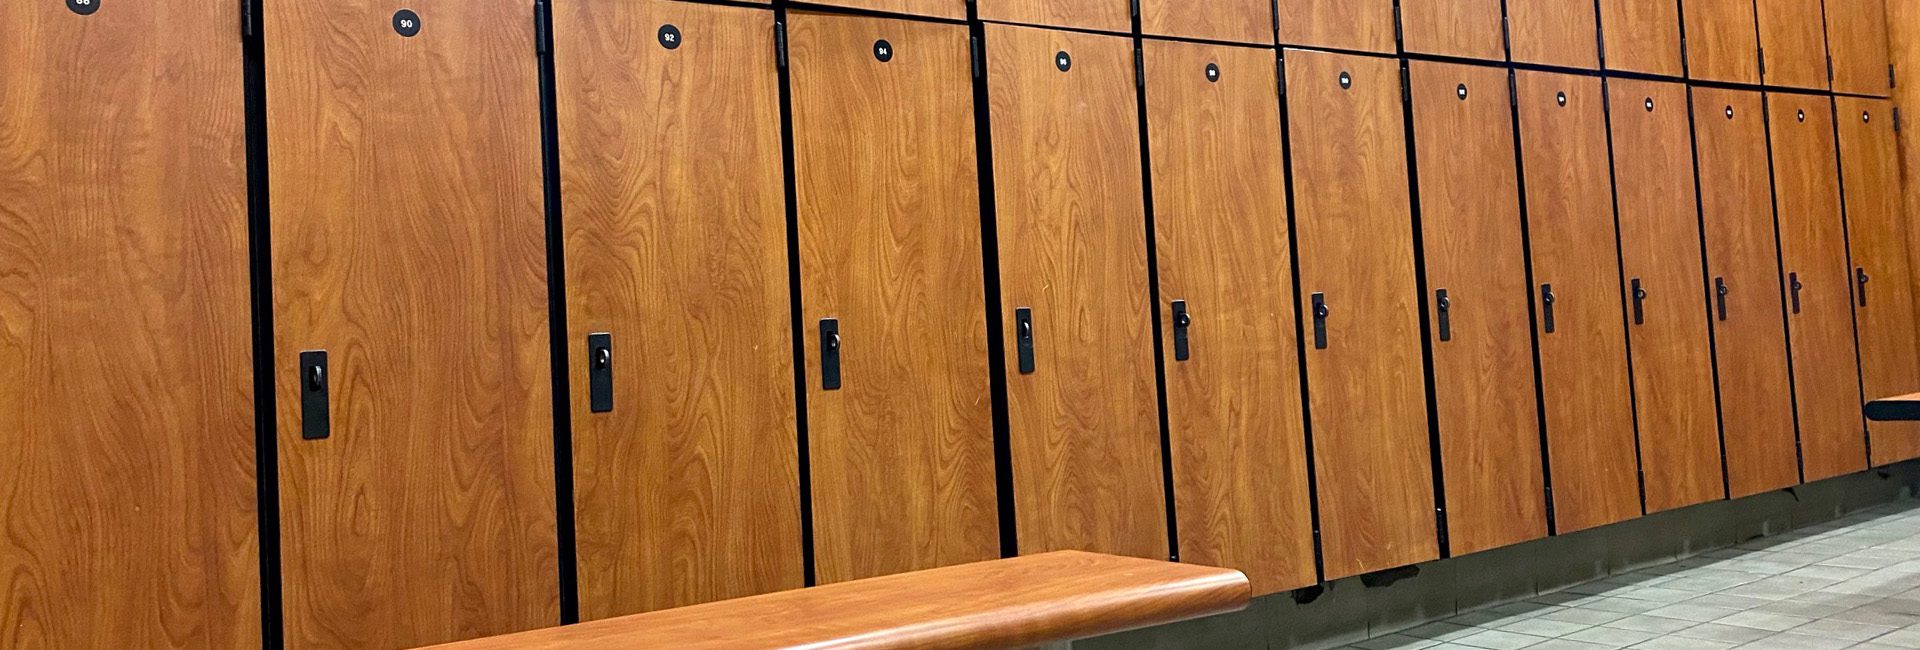 lockers at a gym in north spokane